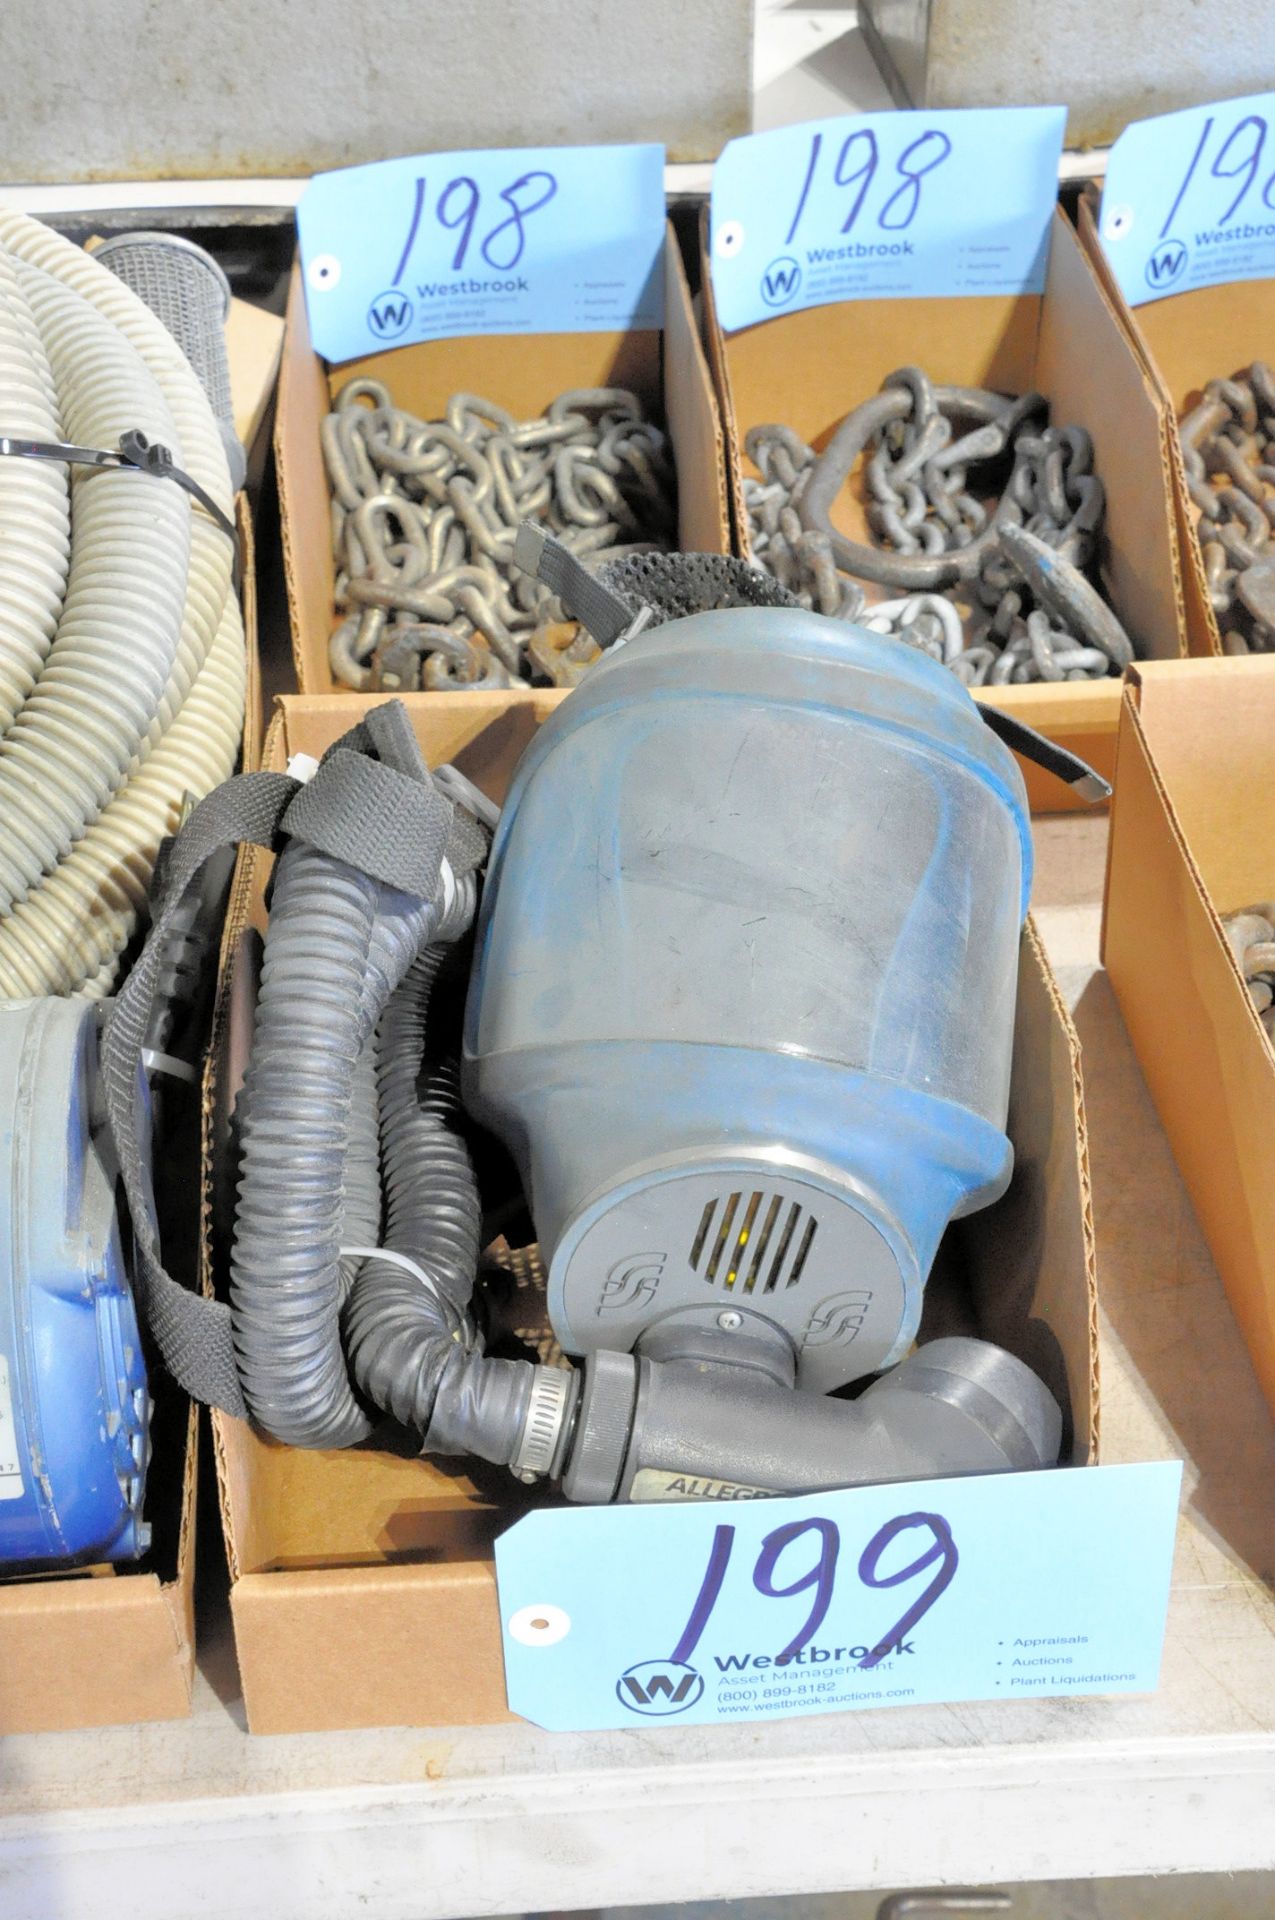 Gast Vacuum Pump with Hose and Respirator Mask with Filters in (3) Boxes - Image 2 of 4